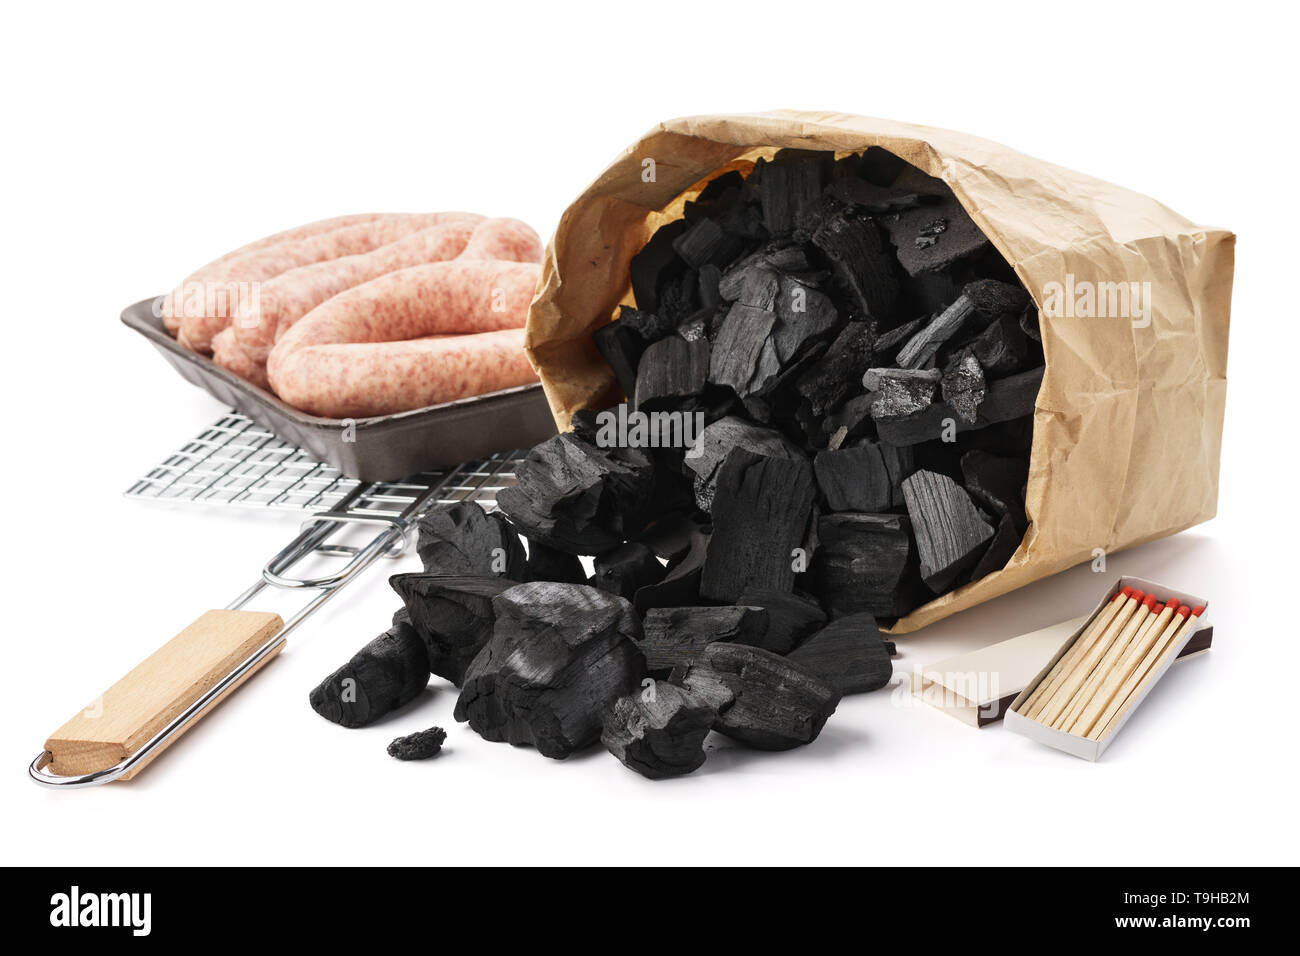 Set of tools and ingredients for barbecue. Paper bag of charcoal, grill, sausages and matches. Isolated. Stock Photo